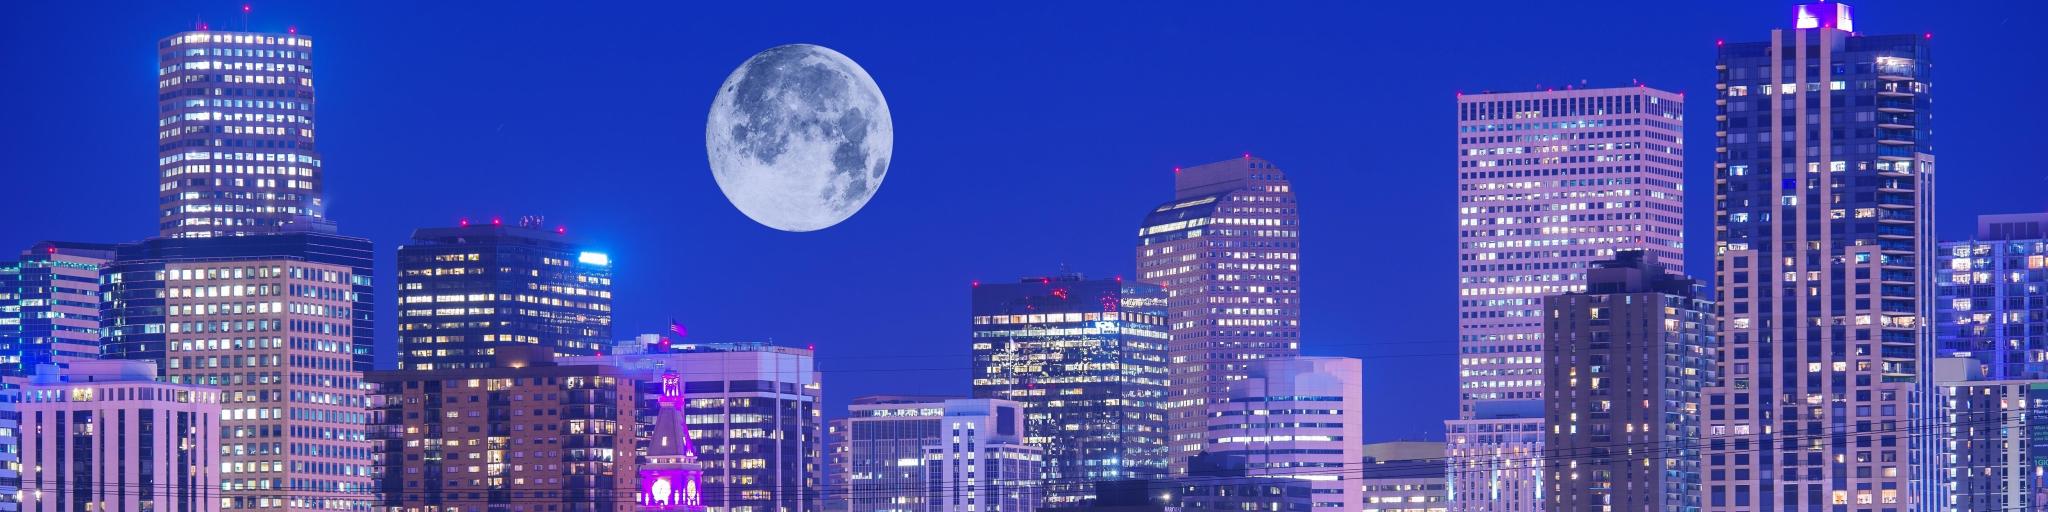 Denver skyline with lights on in the buildings and a big full moon in the sky